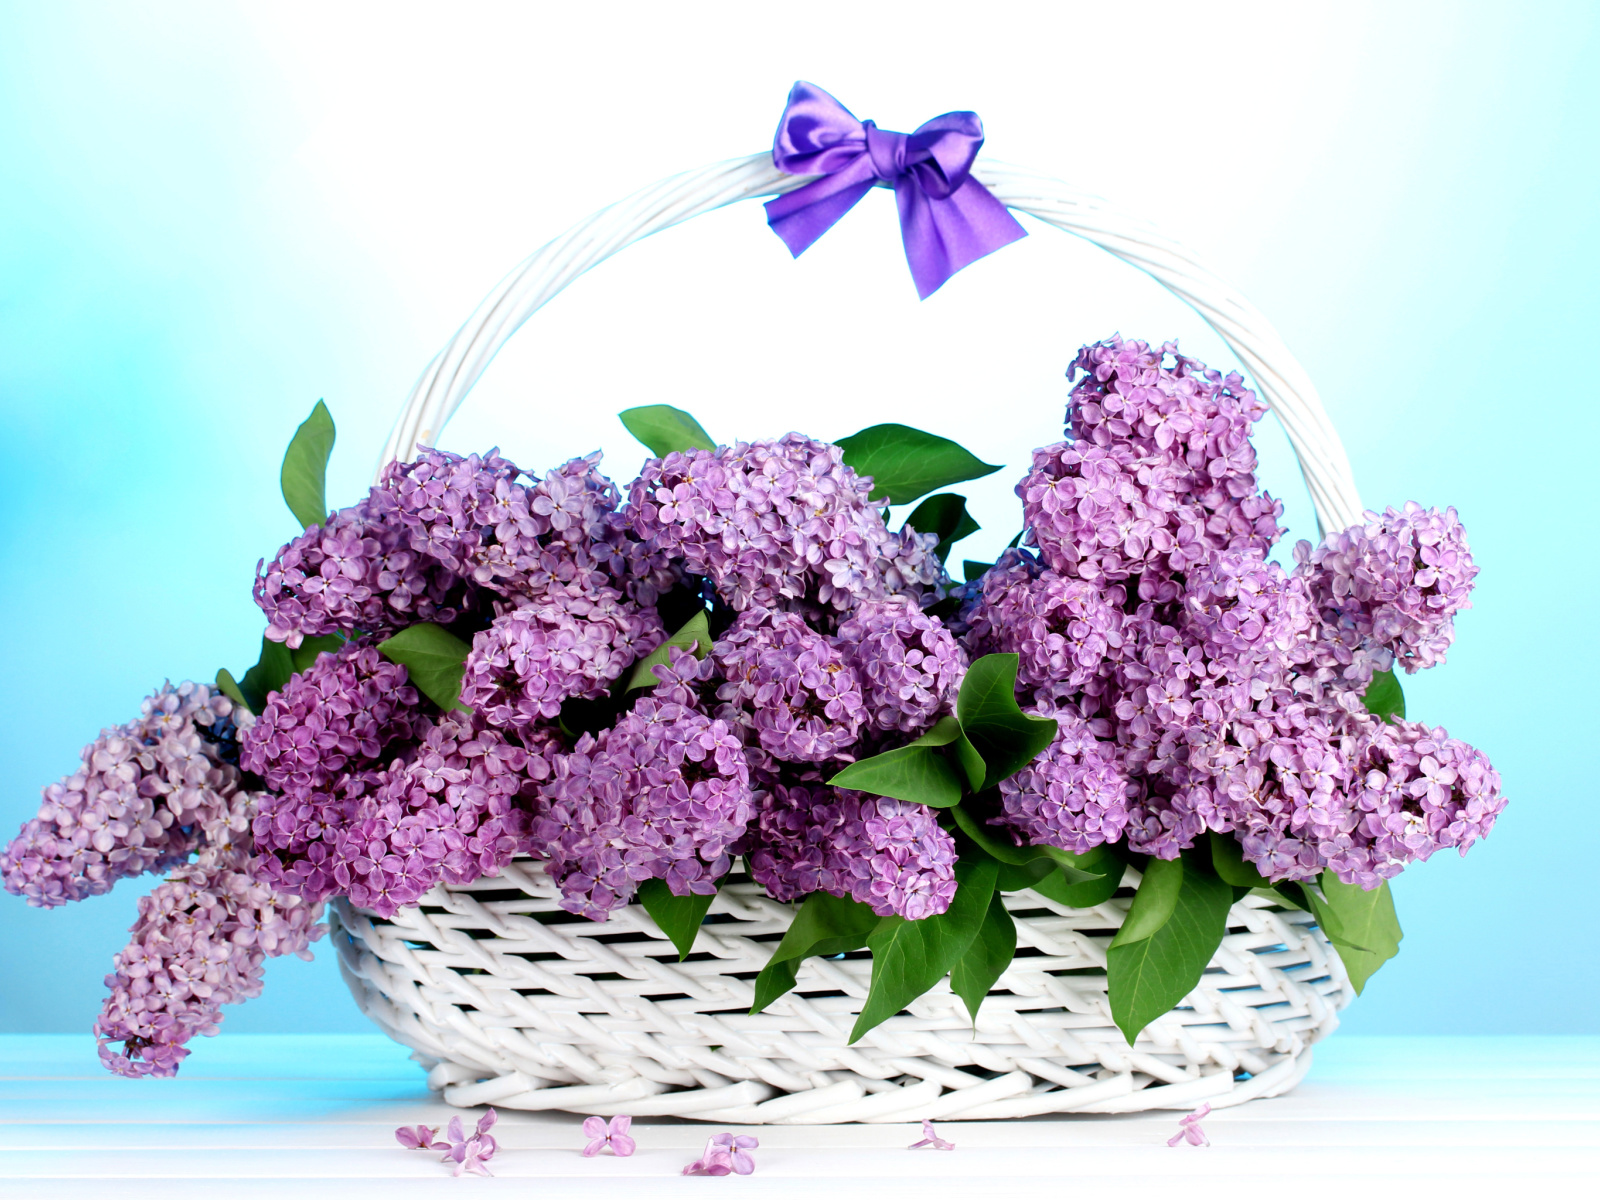 Baskets with lilac flowers screenshot #1 1600x1200